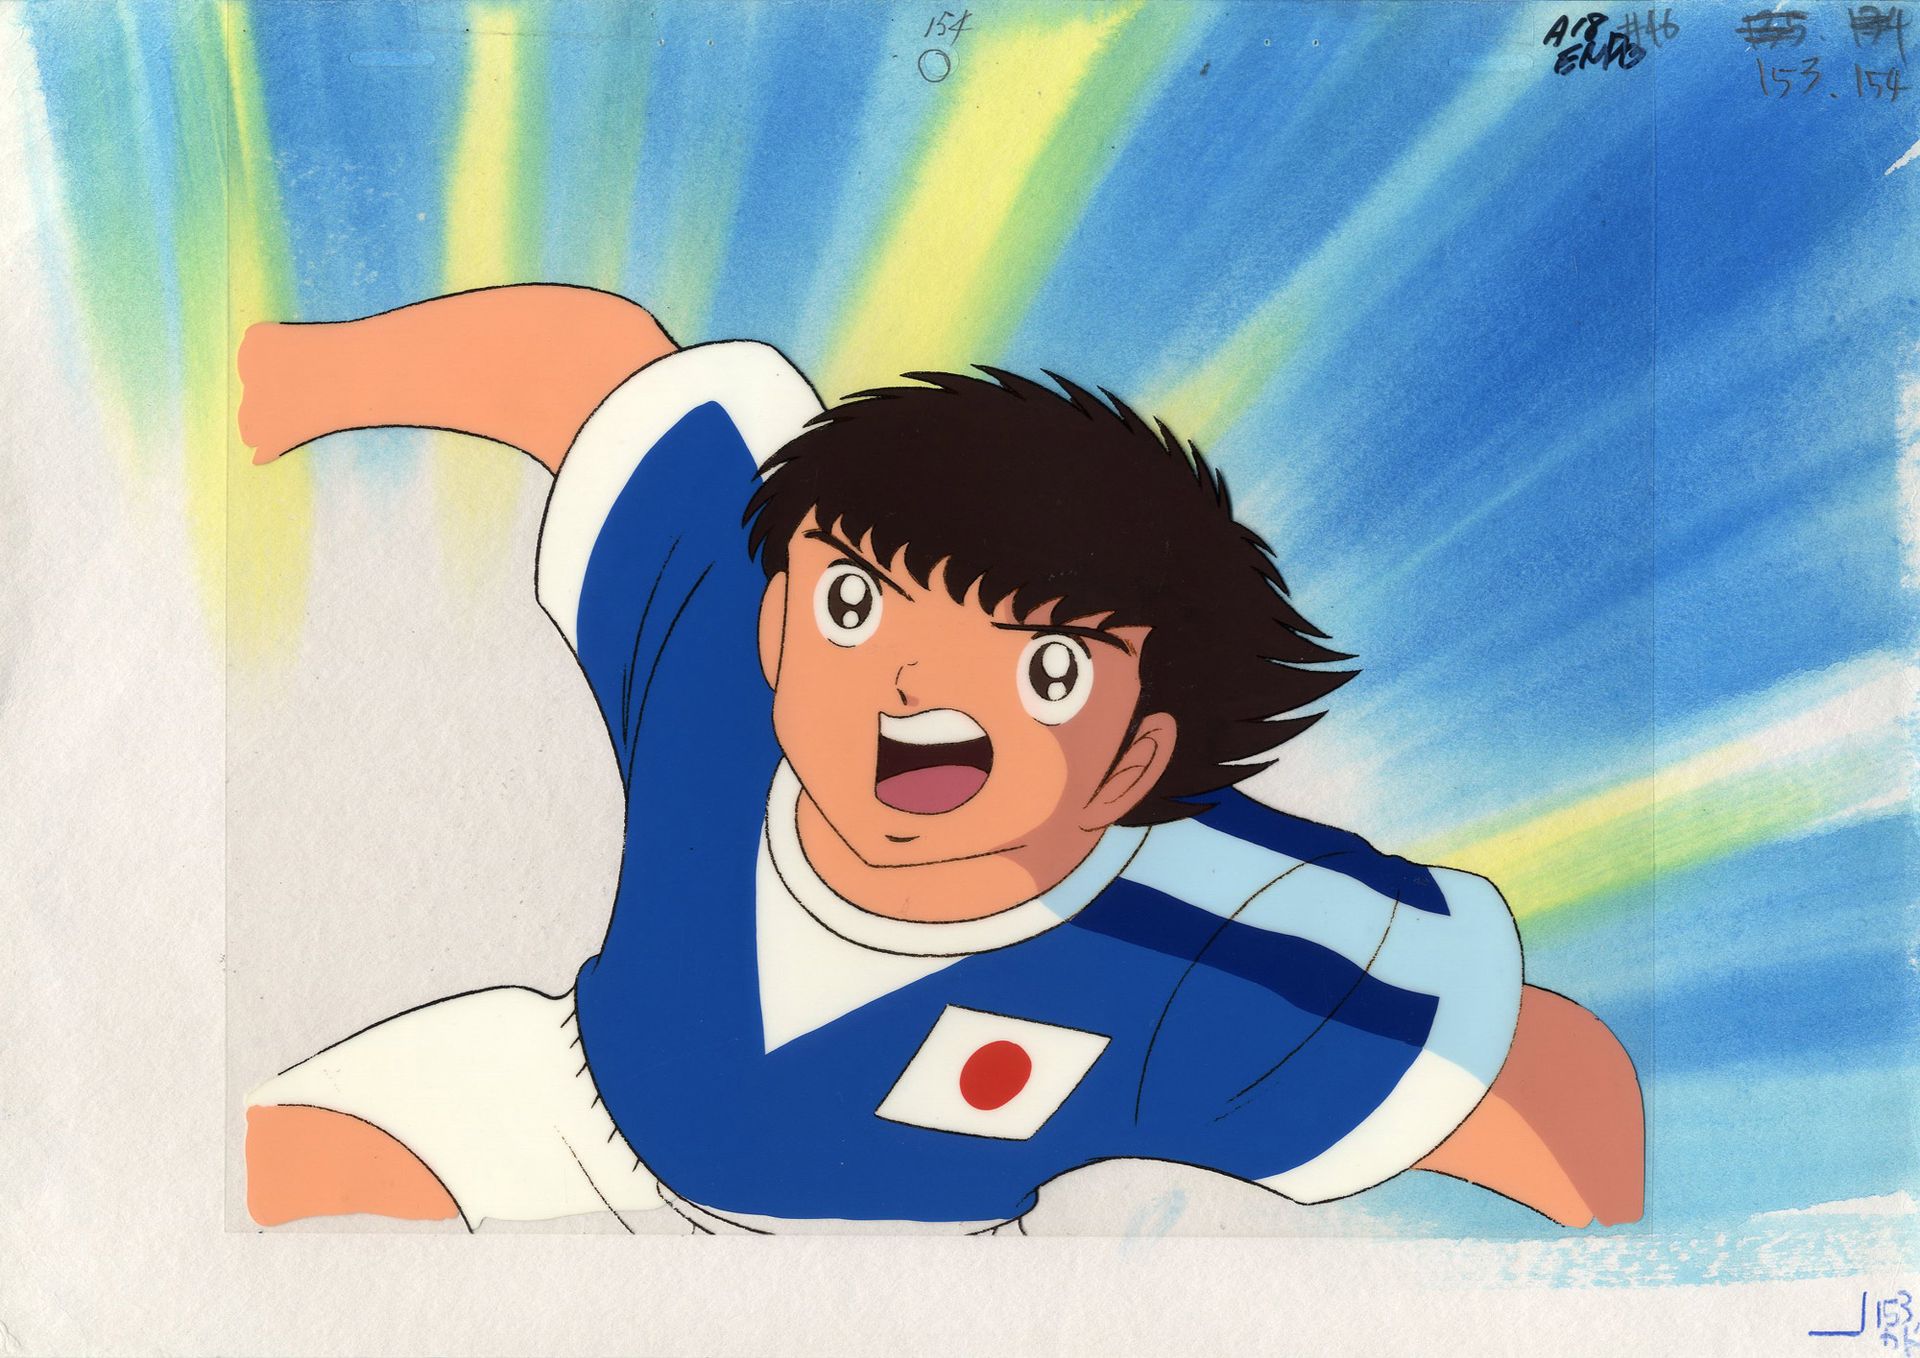 CAPTAIN TSUBASA (キャプテン翼) OLIVIER ATTON Emblematic original cello in ink and  gouache with gouache background accompanied by a dôga in graphite and red  pencil. Produced by Tsuchida Production in 1983-1986. 25 ×